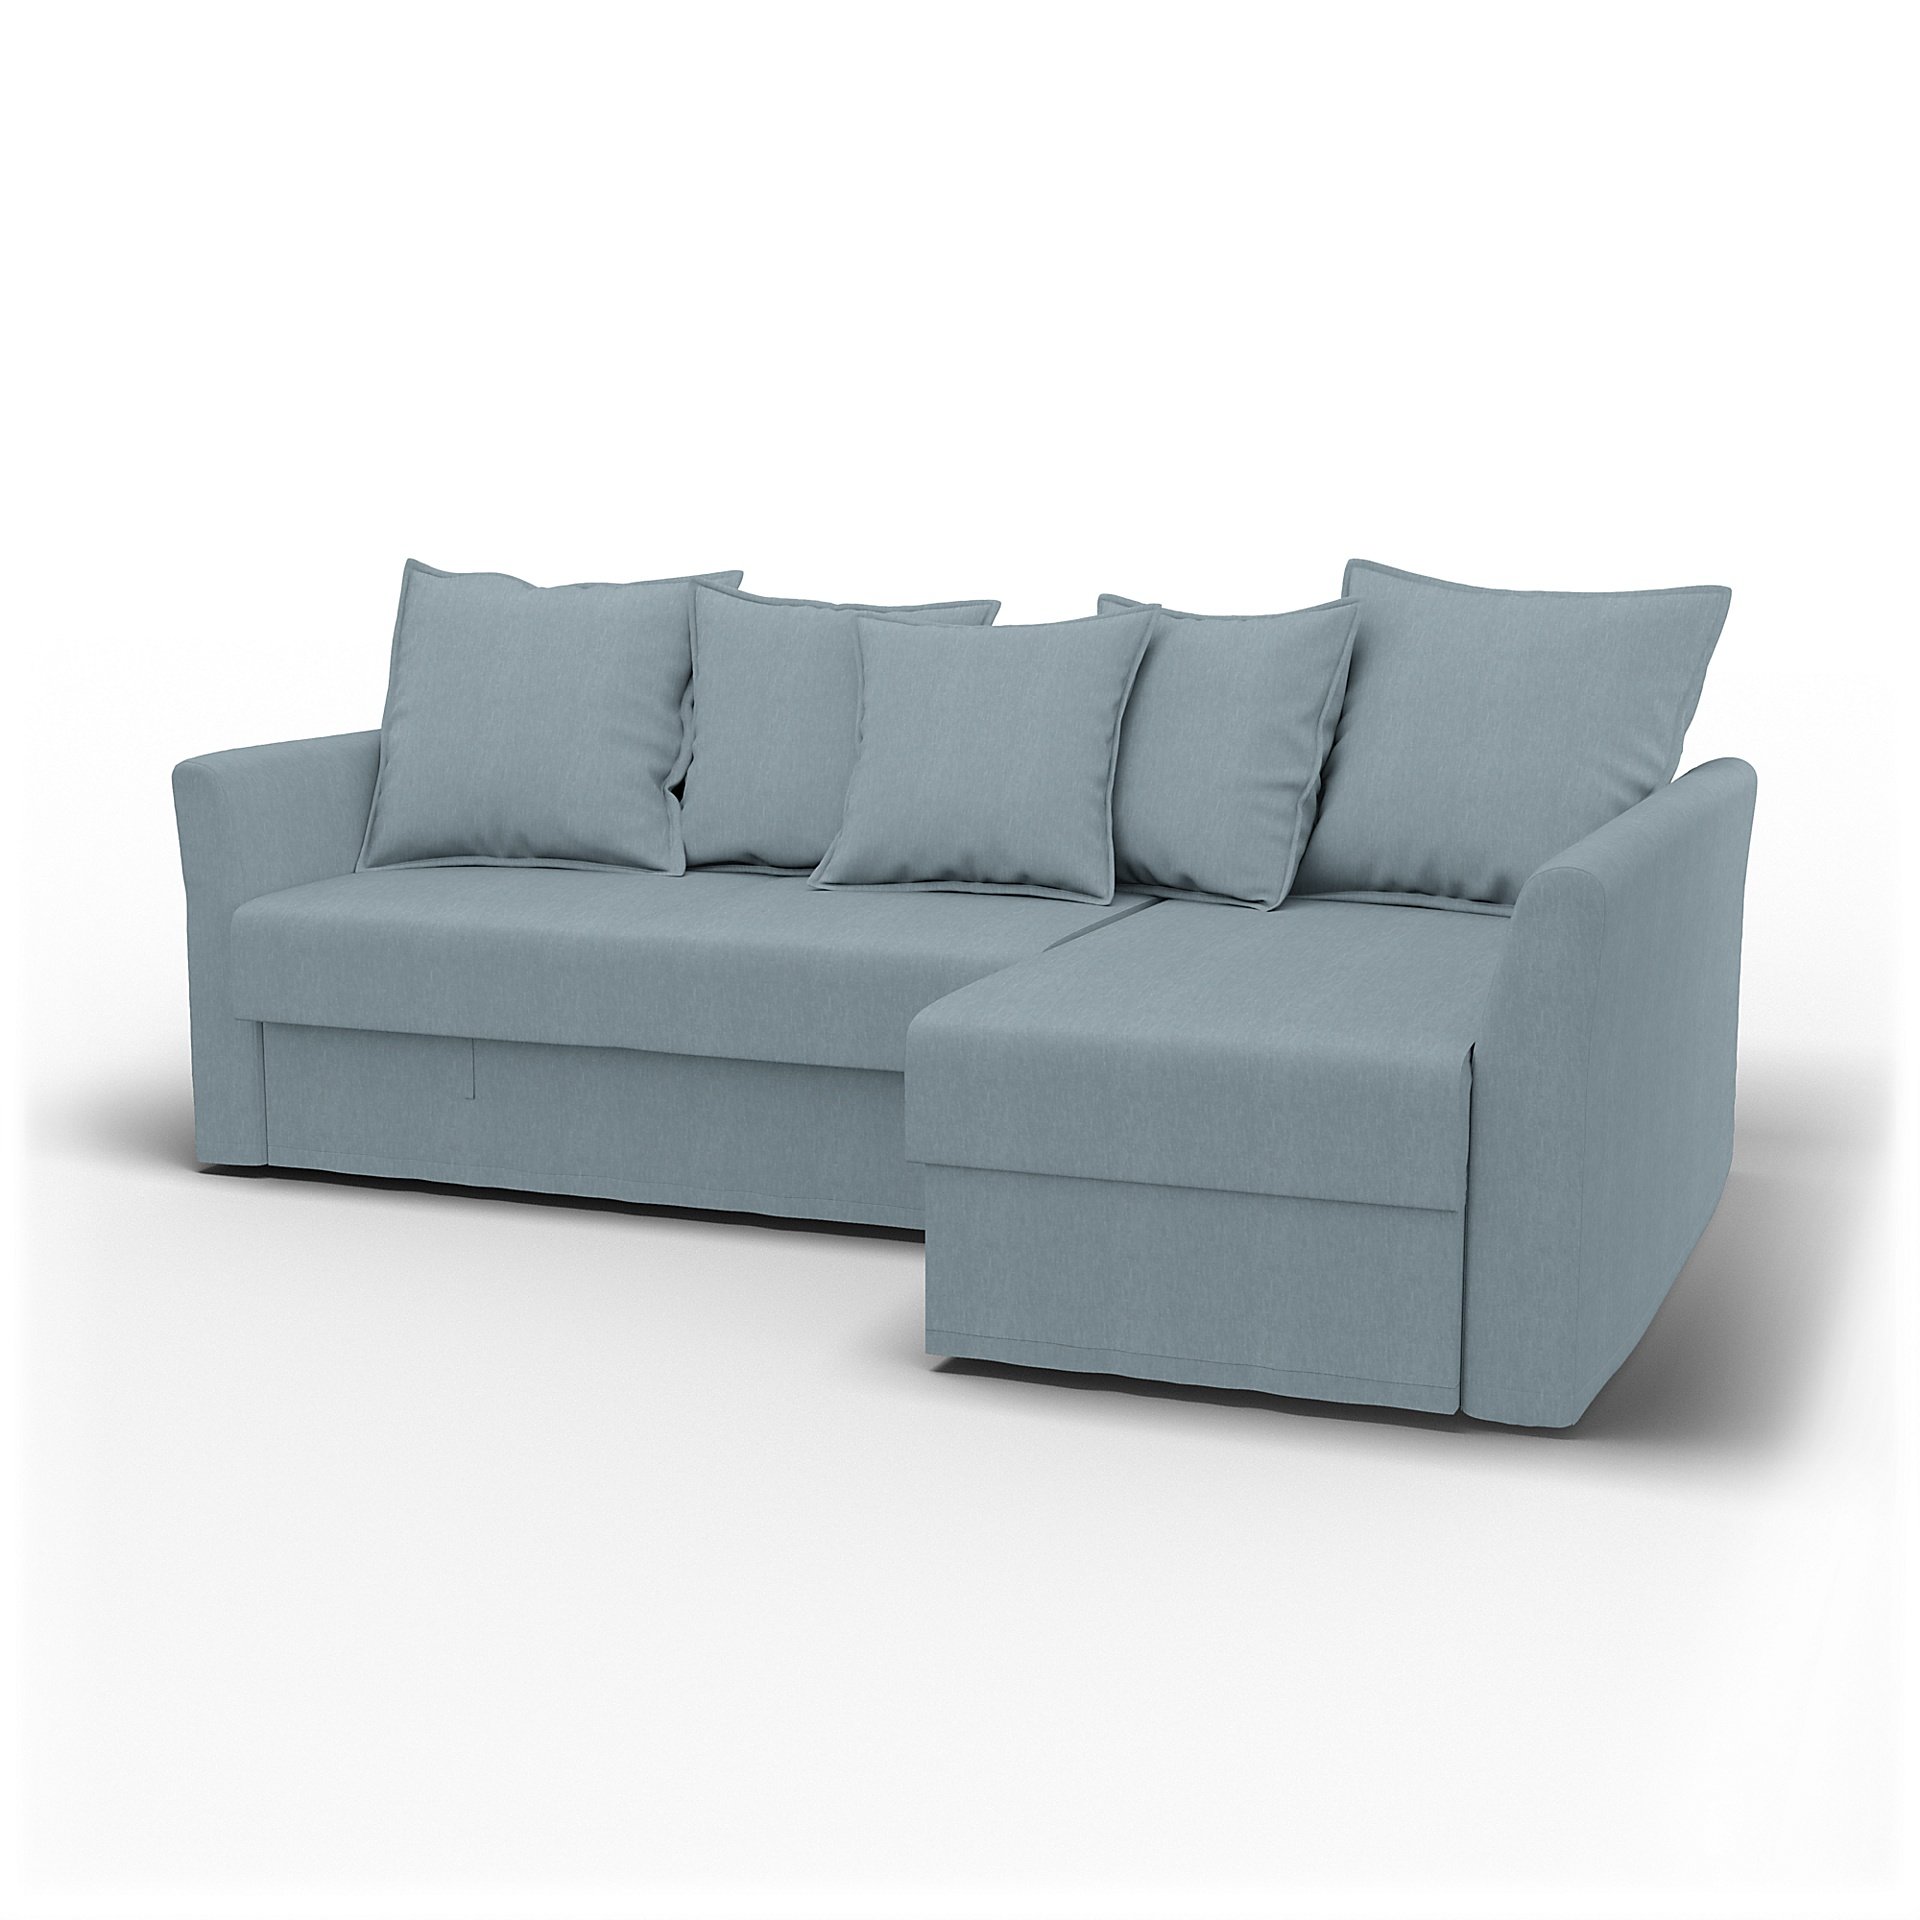 IKEA - Holmsund Sofabed with Chaiselongue, Dusty Blue, Linen - Bemz